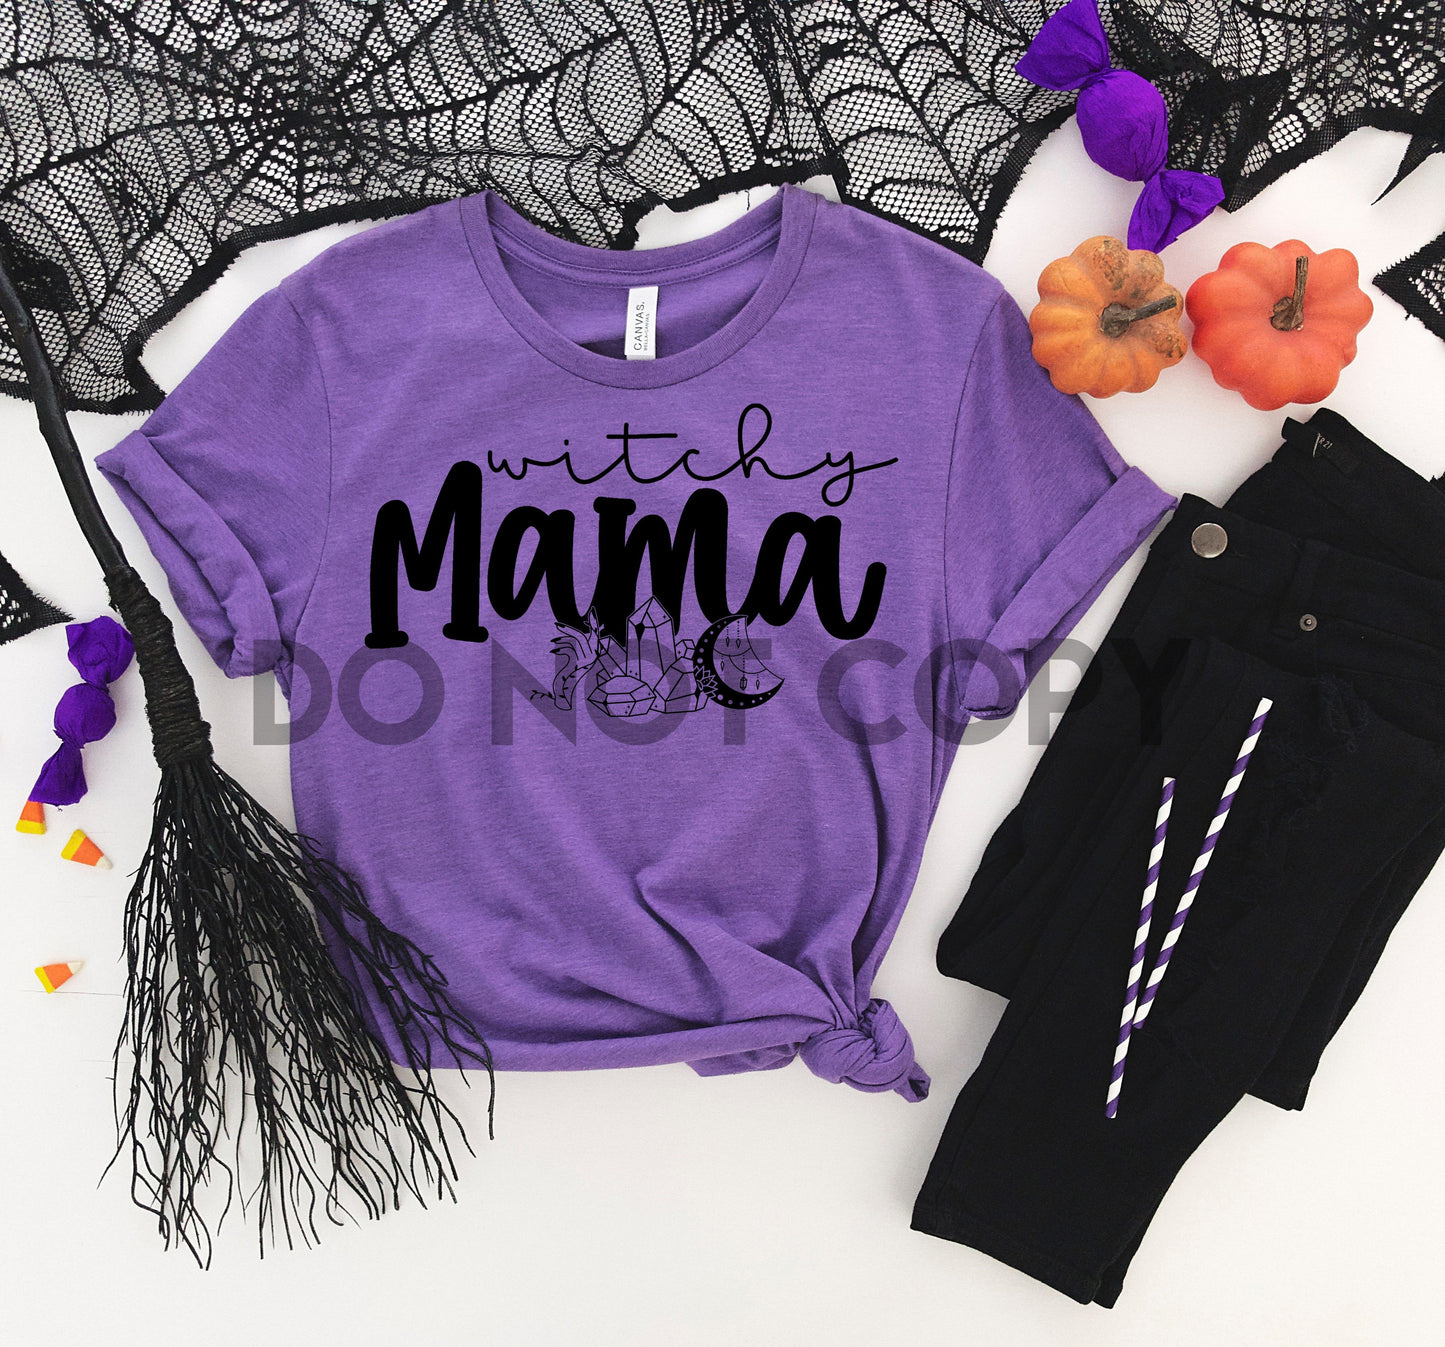 Witchy Mama one color Screen print transfer